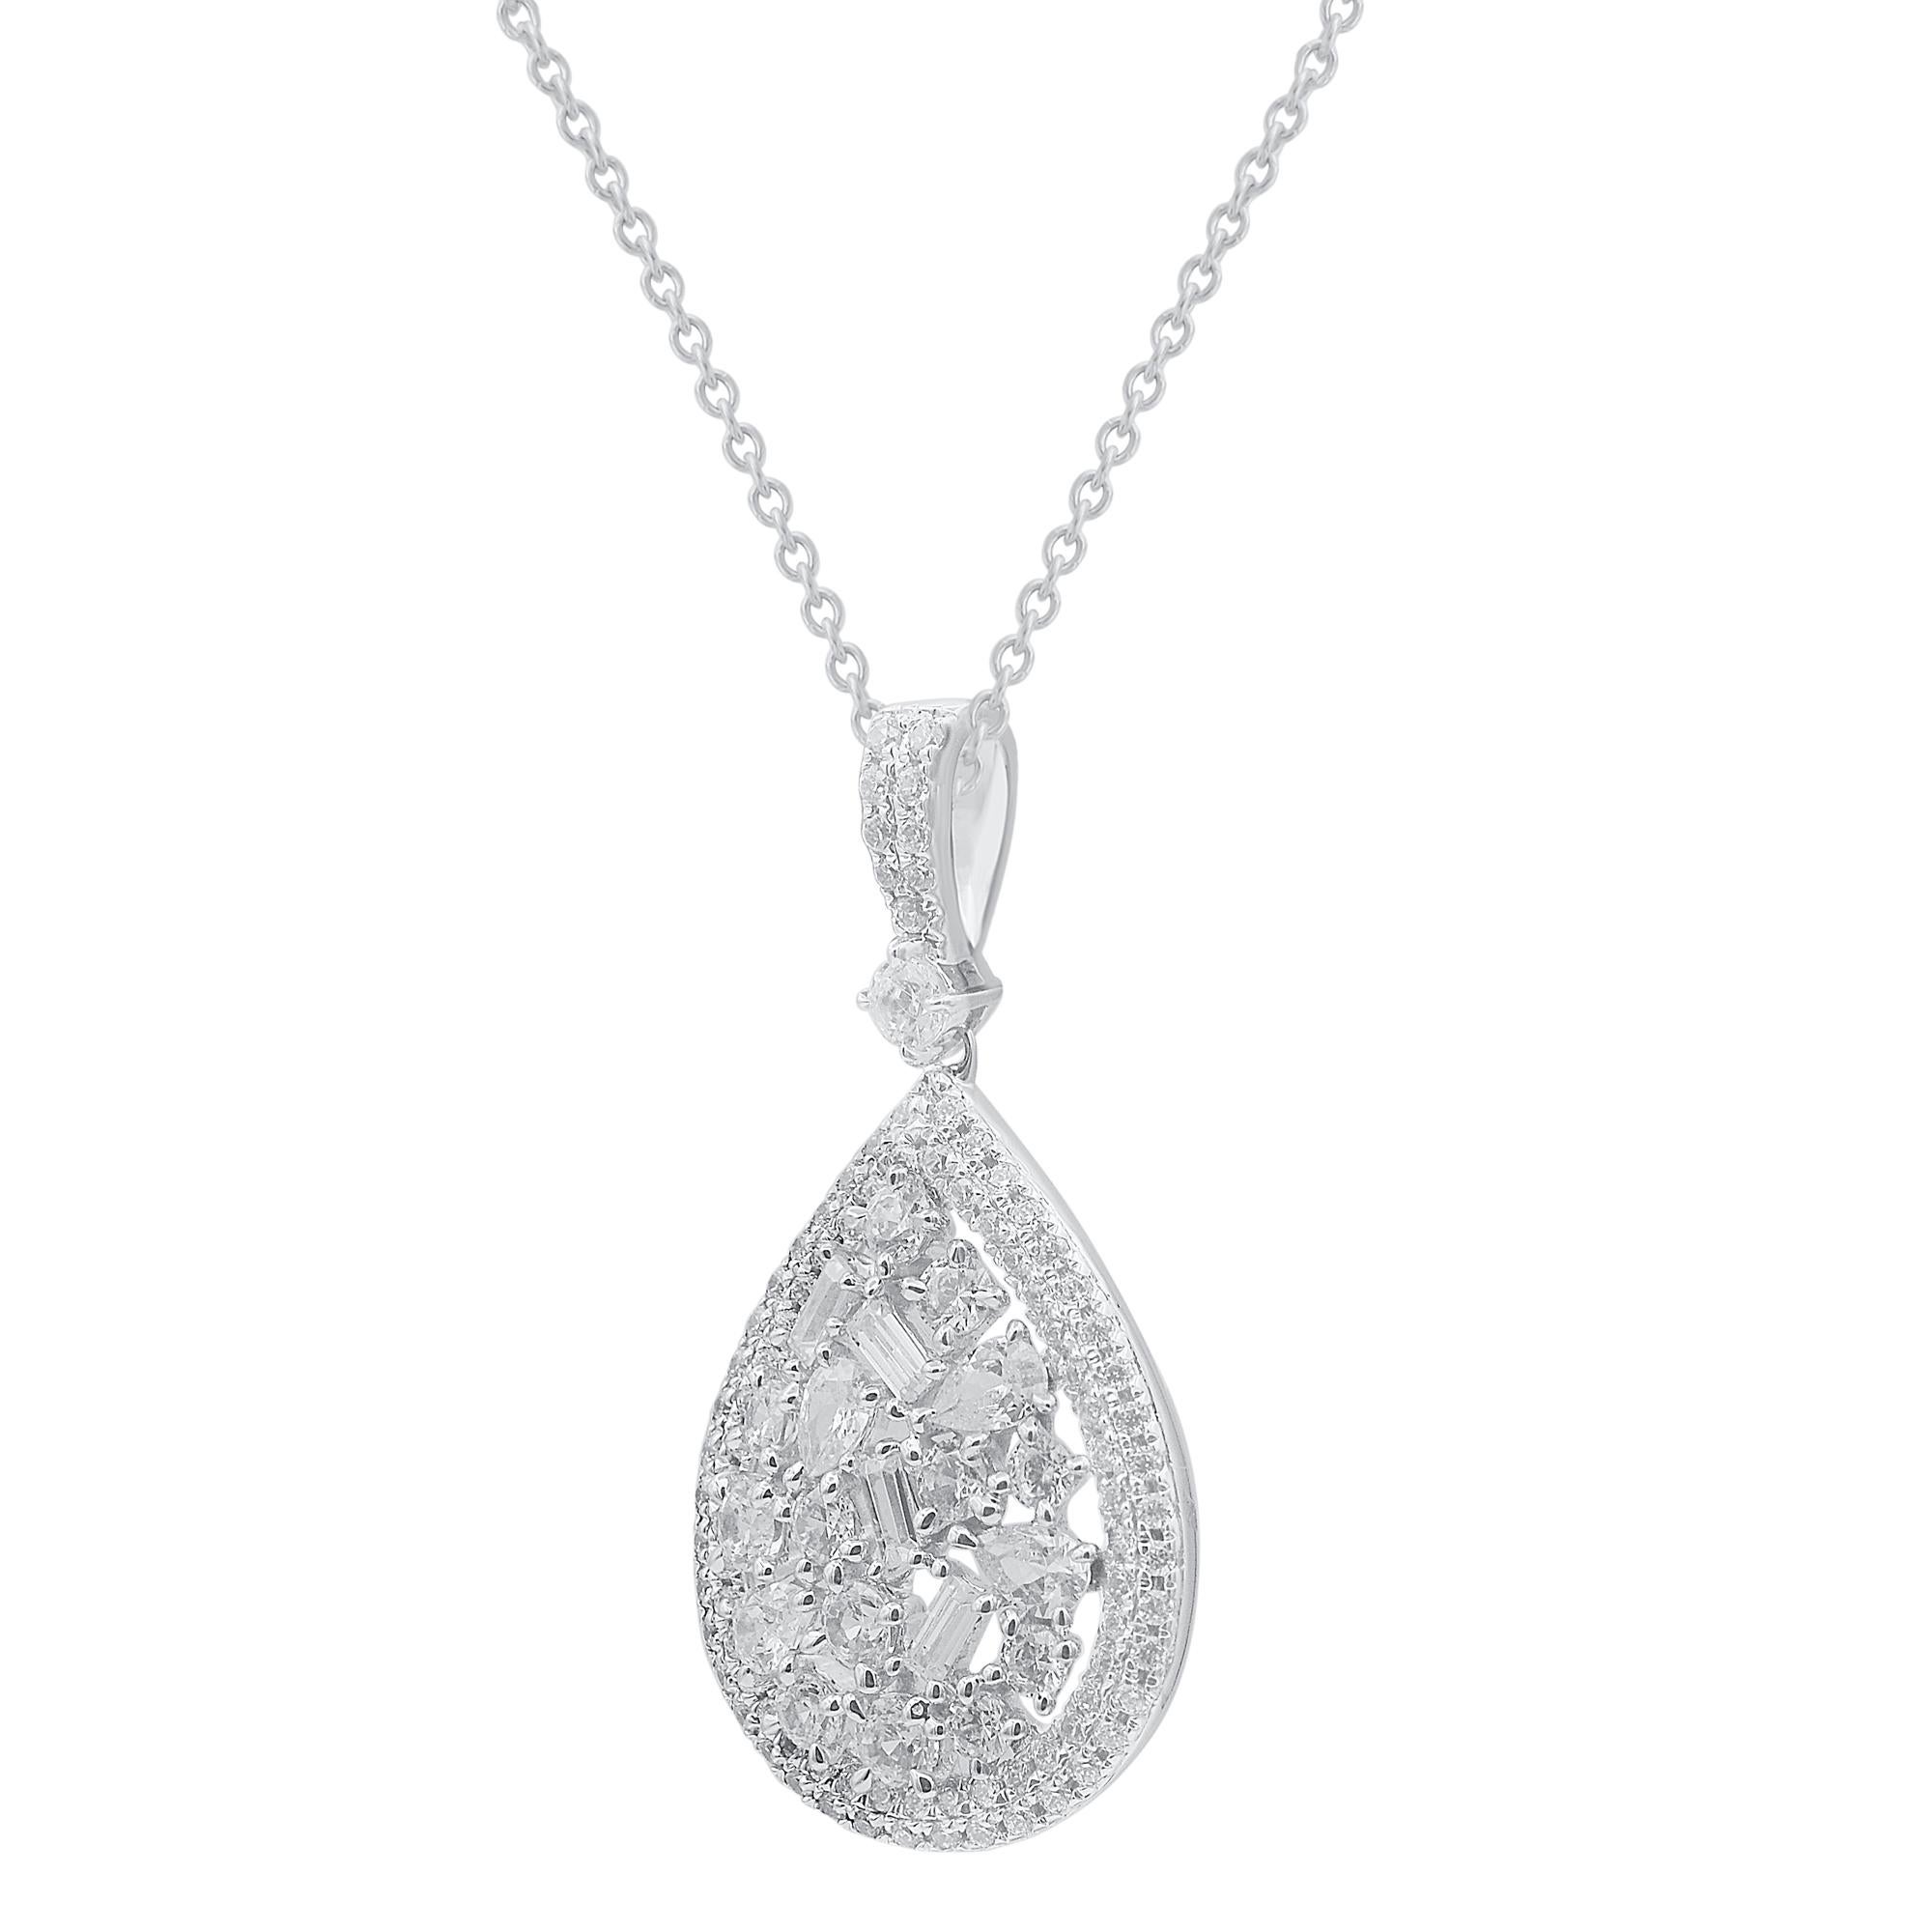 Top off your casual or dressy look with this splendid diamond pendant. These teardrop pendant are studded with 113 pcs Pear, Baguette, Brilliant Cut natural diamonds in prong setting in 14Kt white gold. Total diamond weight is 1.0 carat. Diamonds